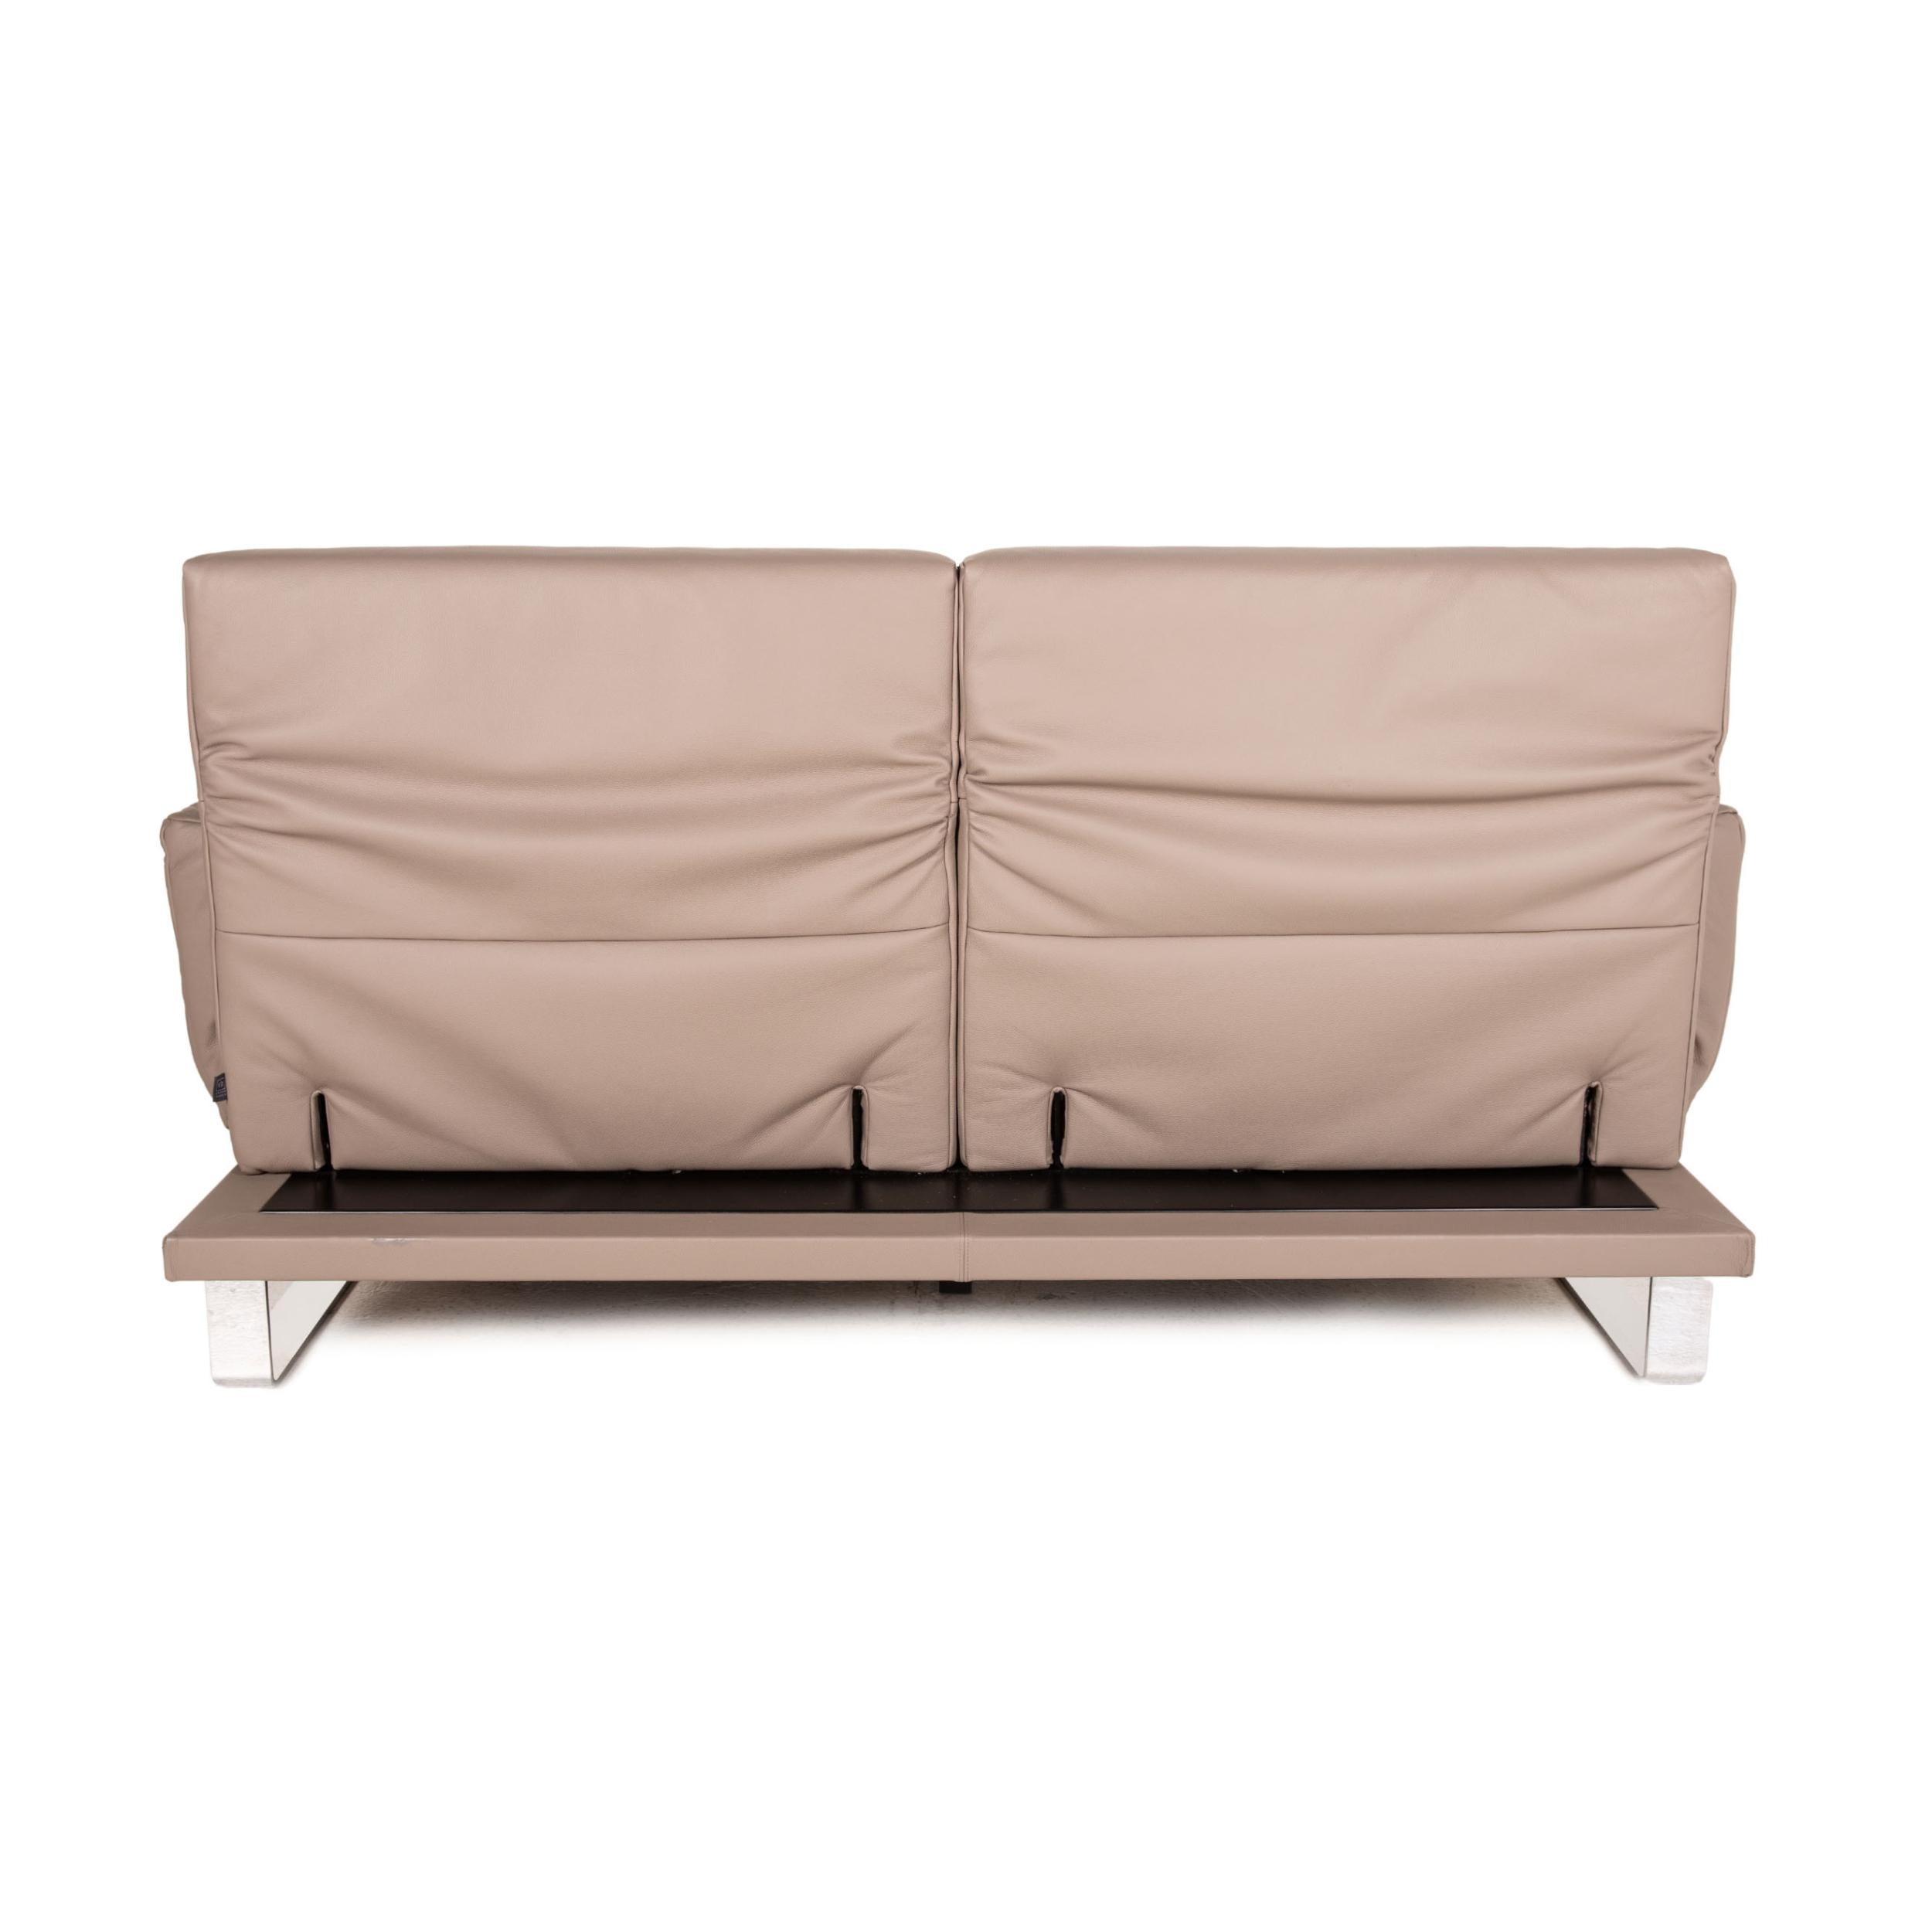 Franz Fertig Letto leather sofa beige two-seater function sleeping function For Sale 2